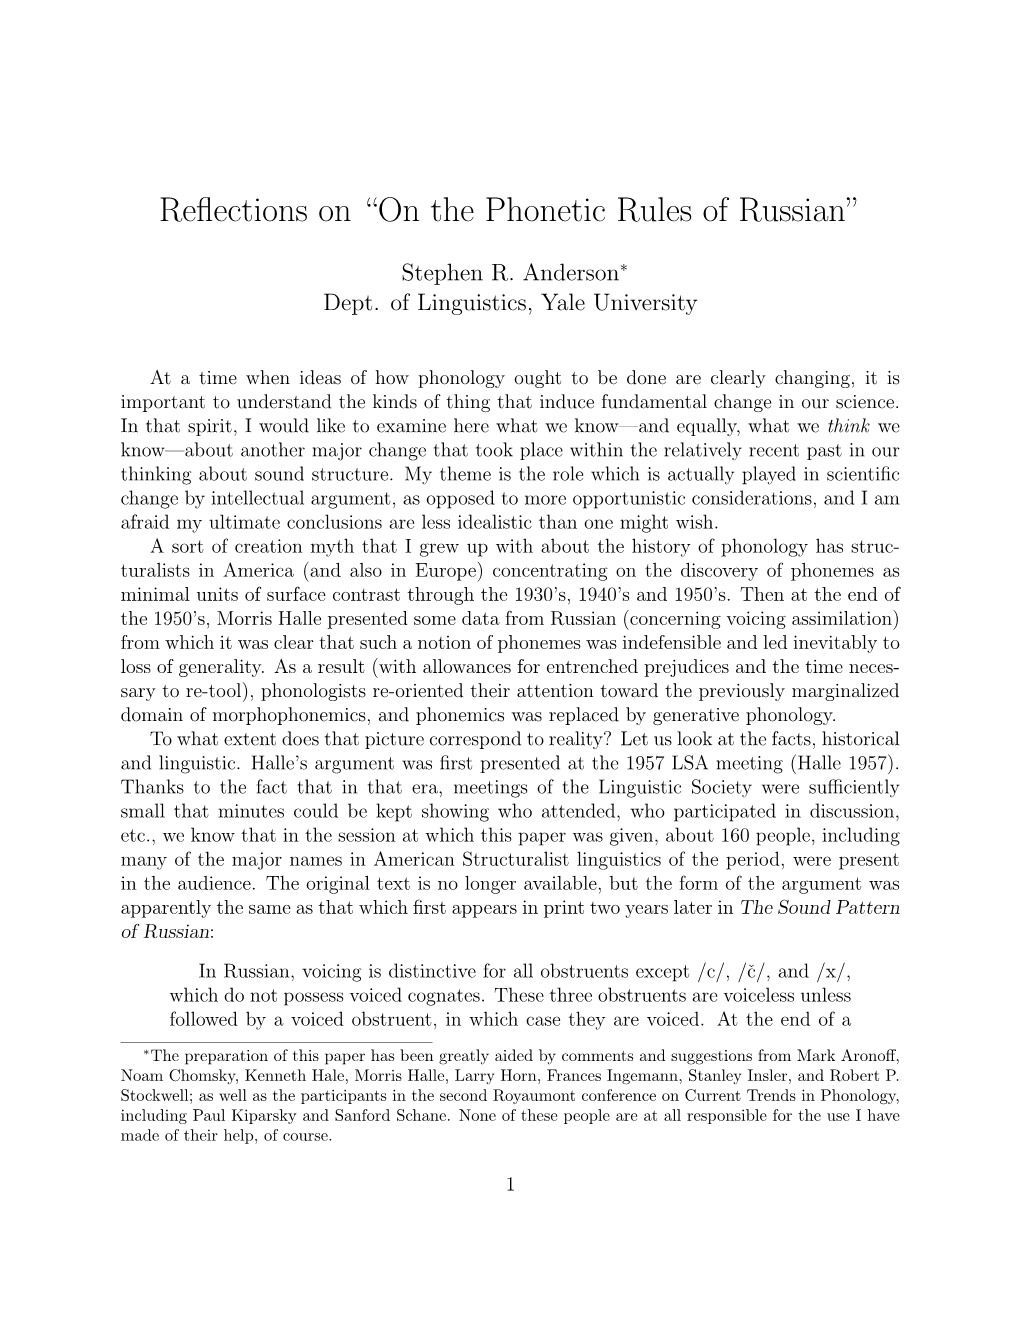 Reflections on “On the Phonetic Rules of Russian”